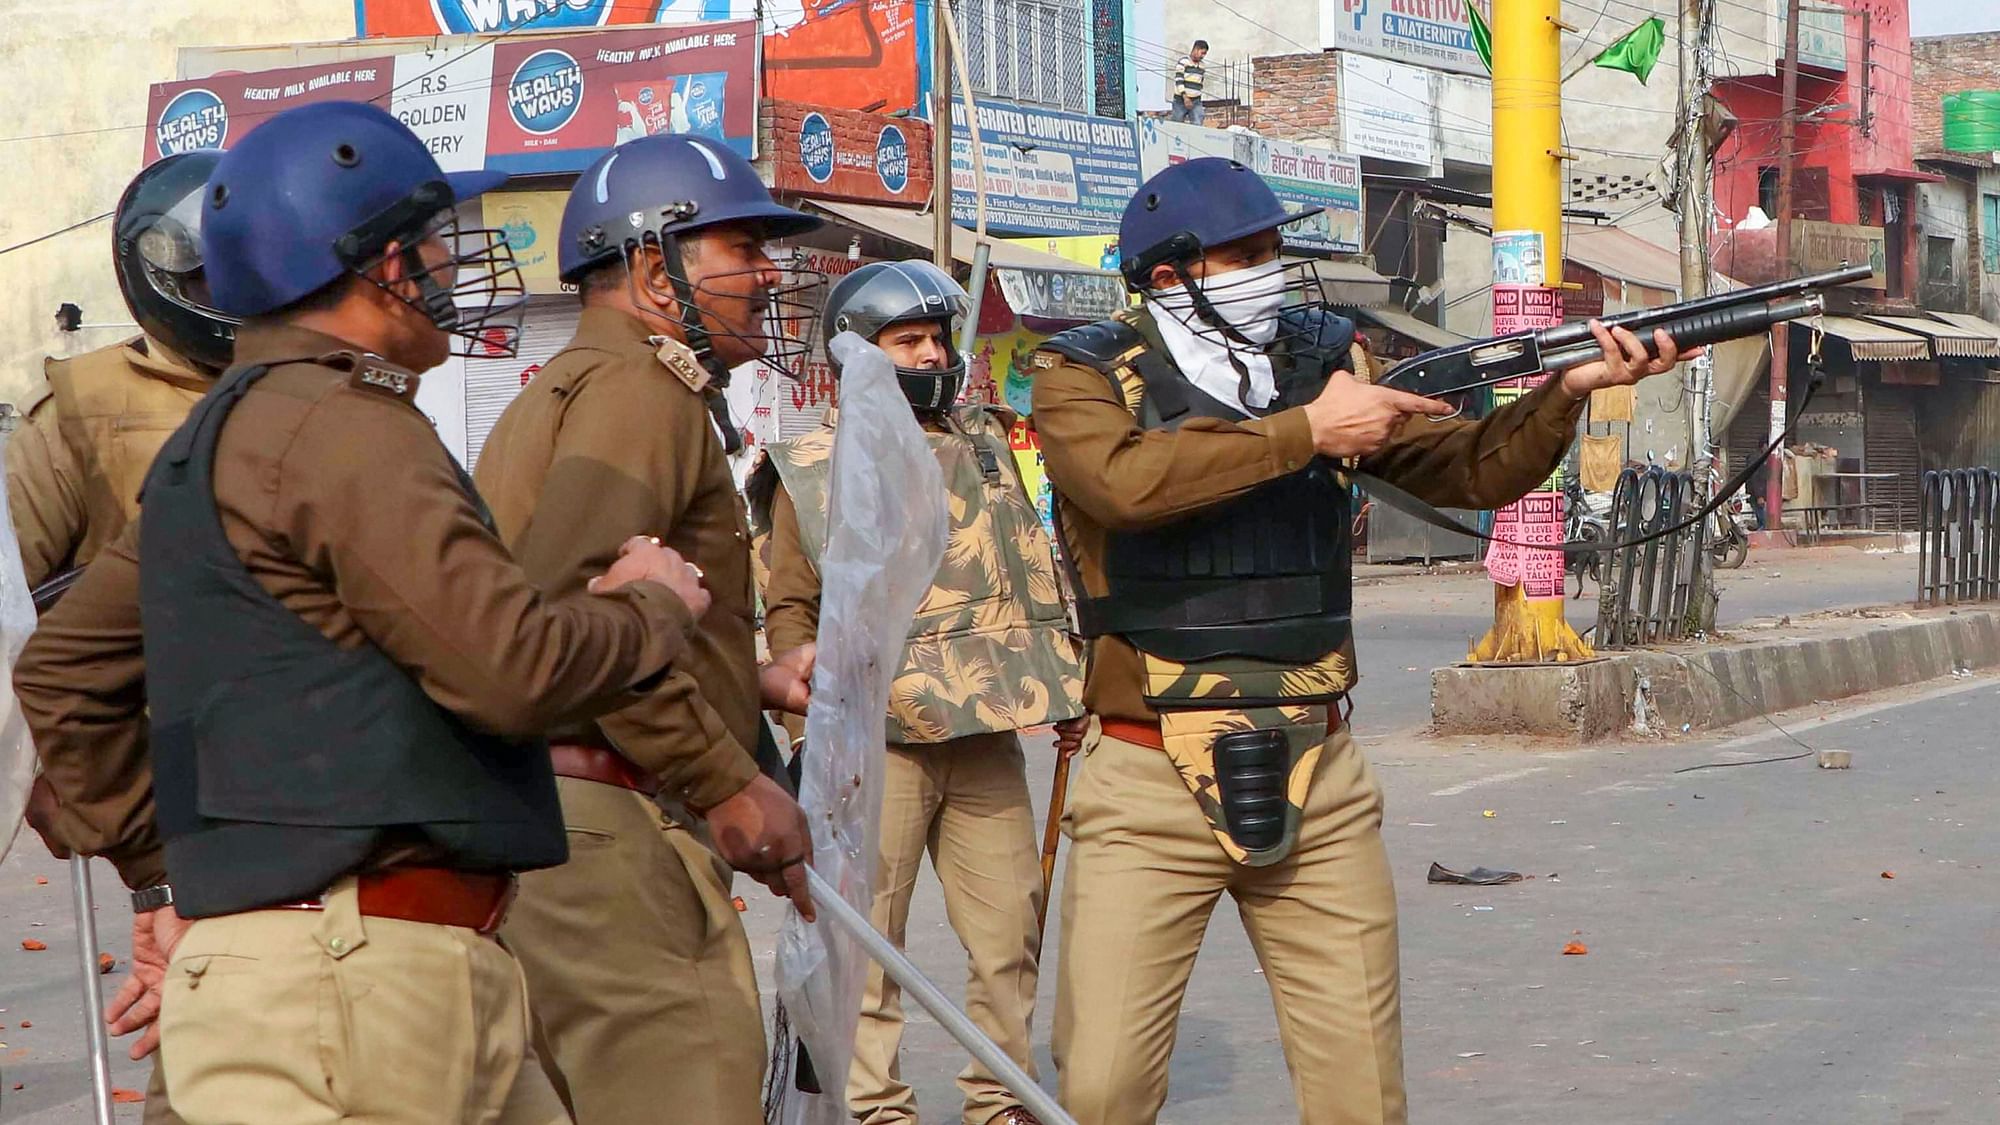  Police personnel aims a gun at protestors during a rally against NRC and amended Citizenship Act that turned violent, at Khadara area of old Lucknow. Image used for representational purposes.